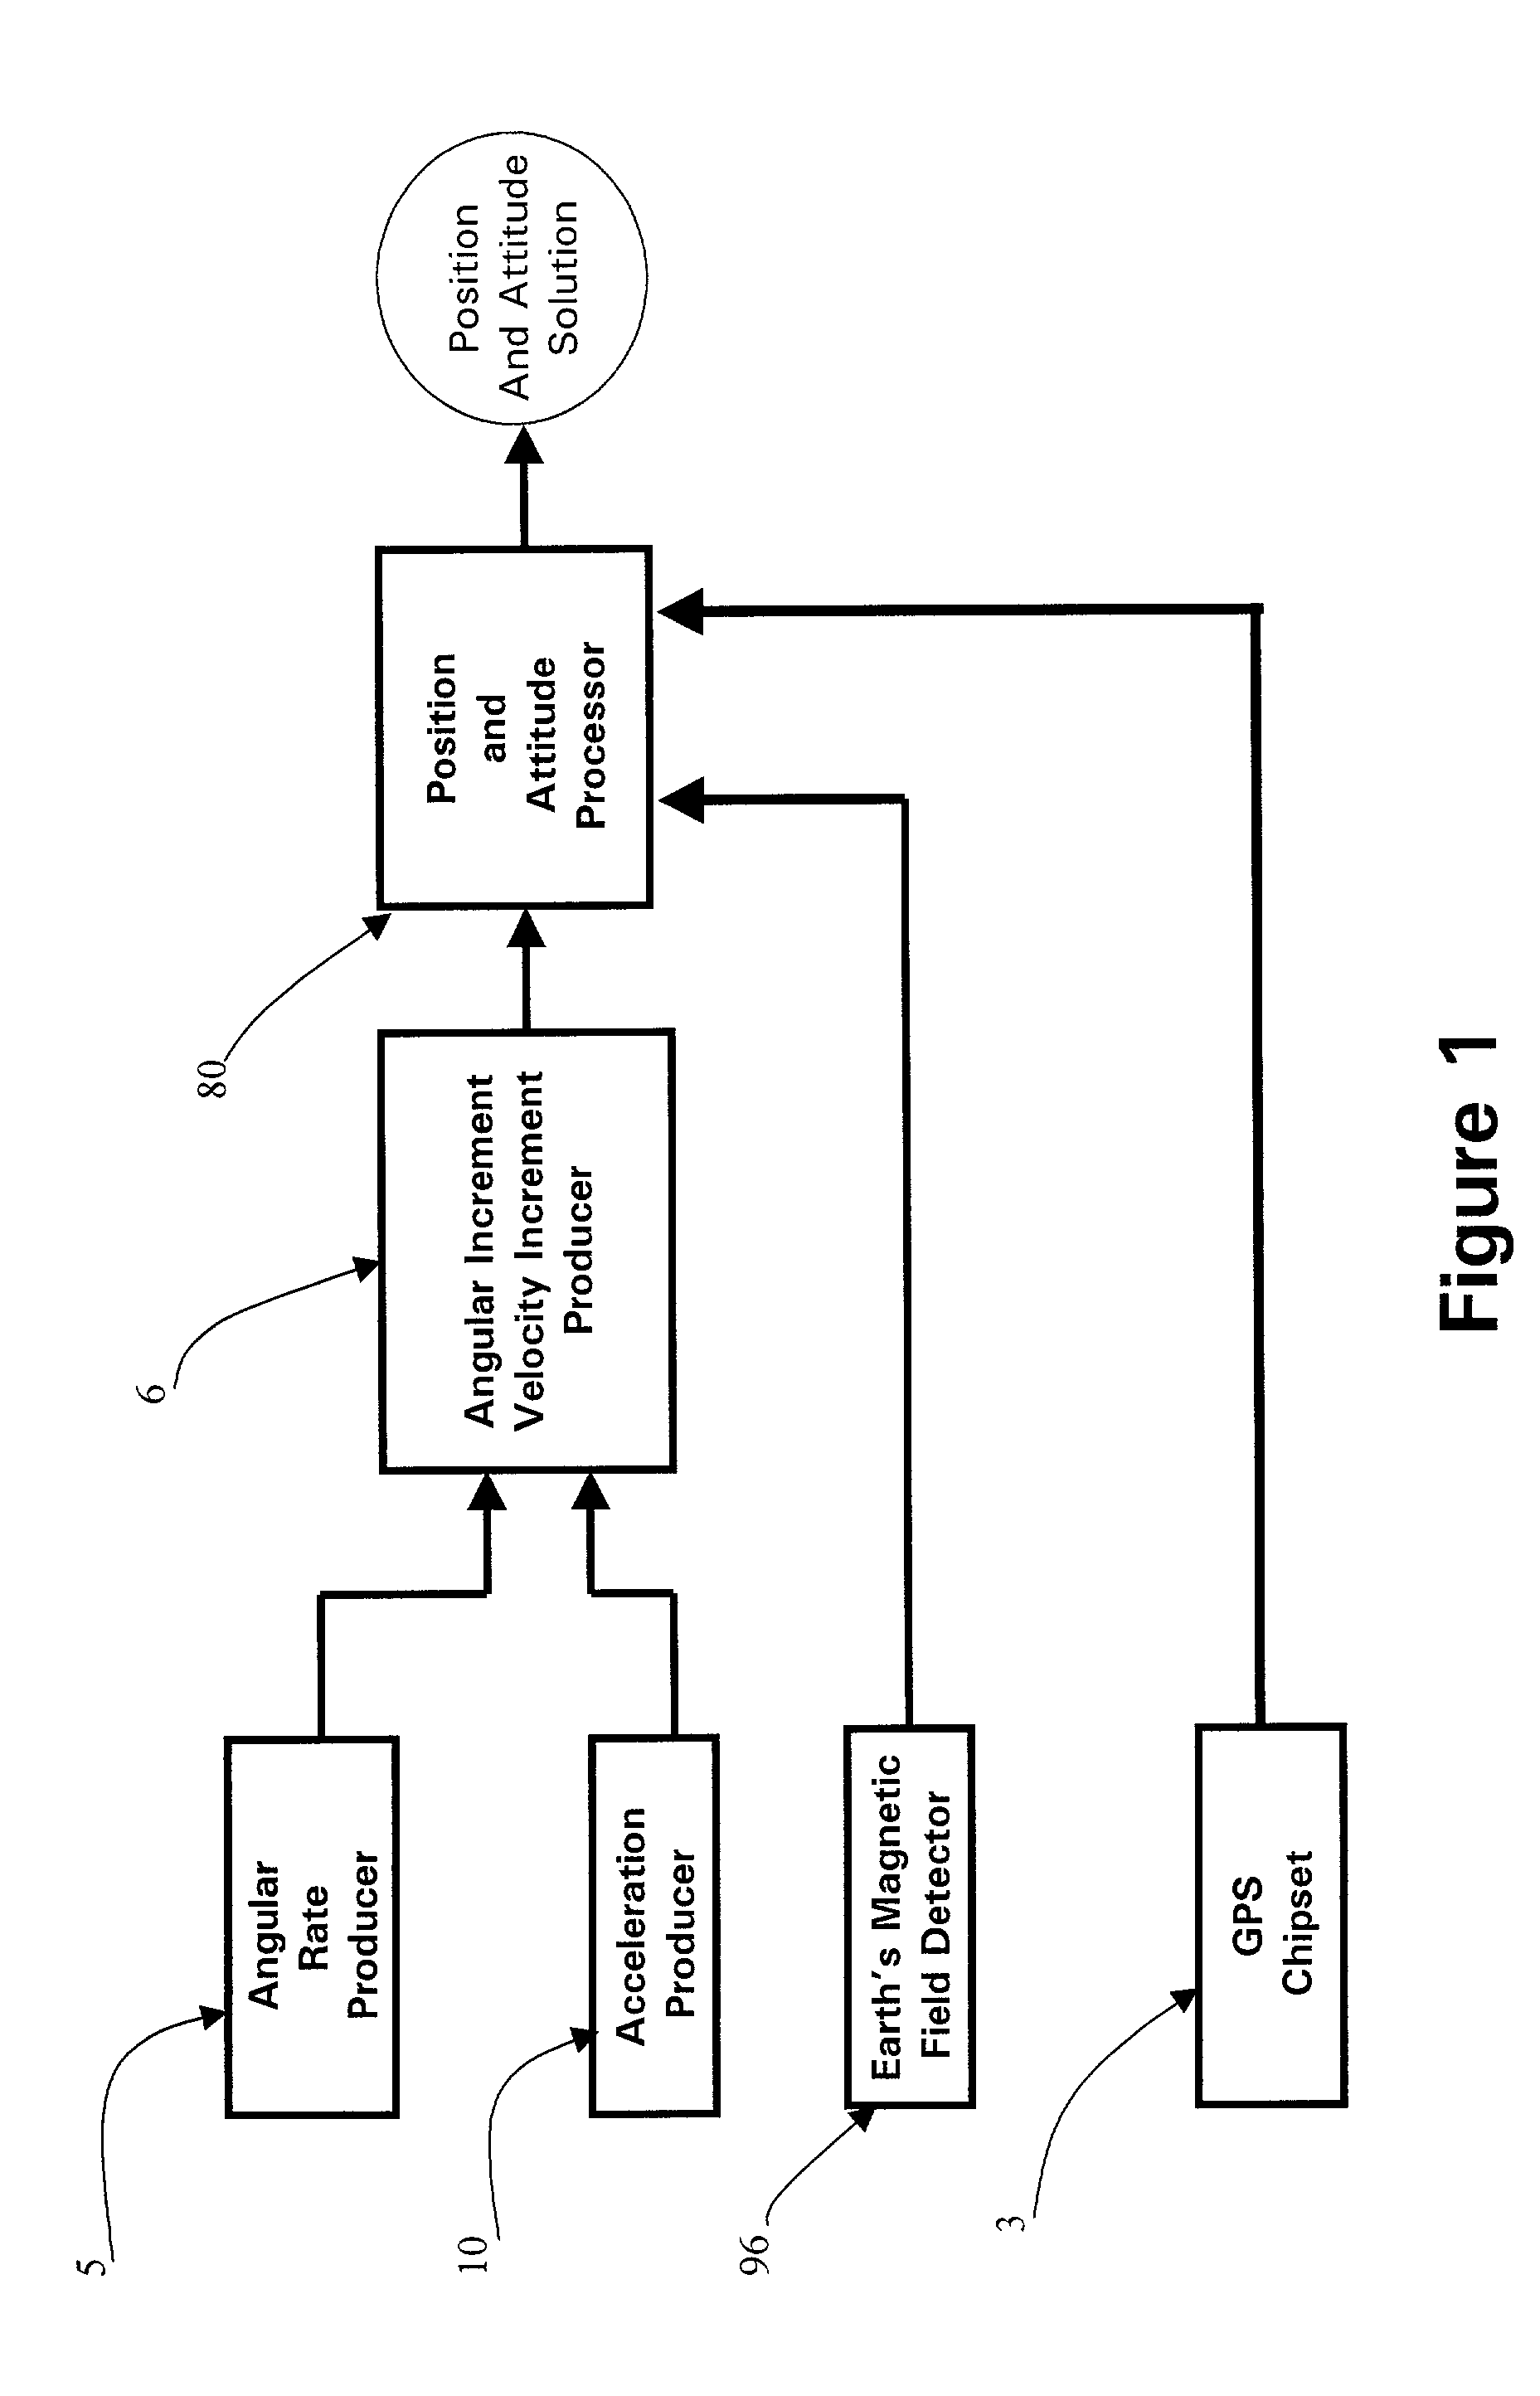 Micro integrated global positioning system/inertial measurement unit system